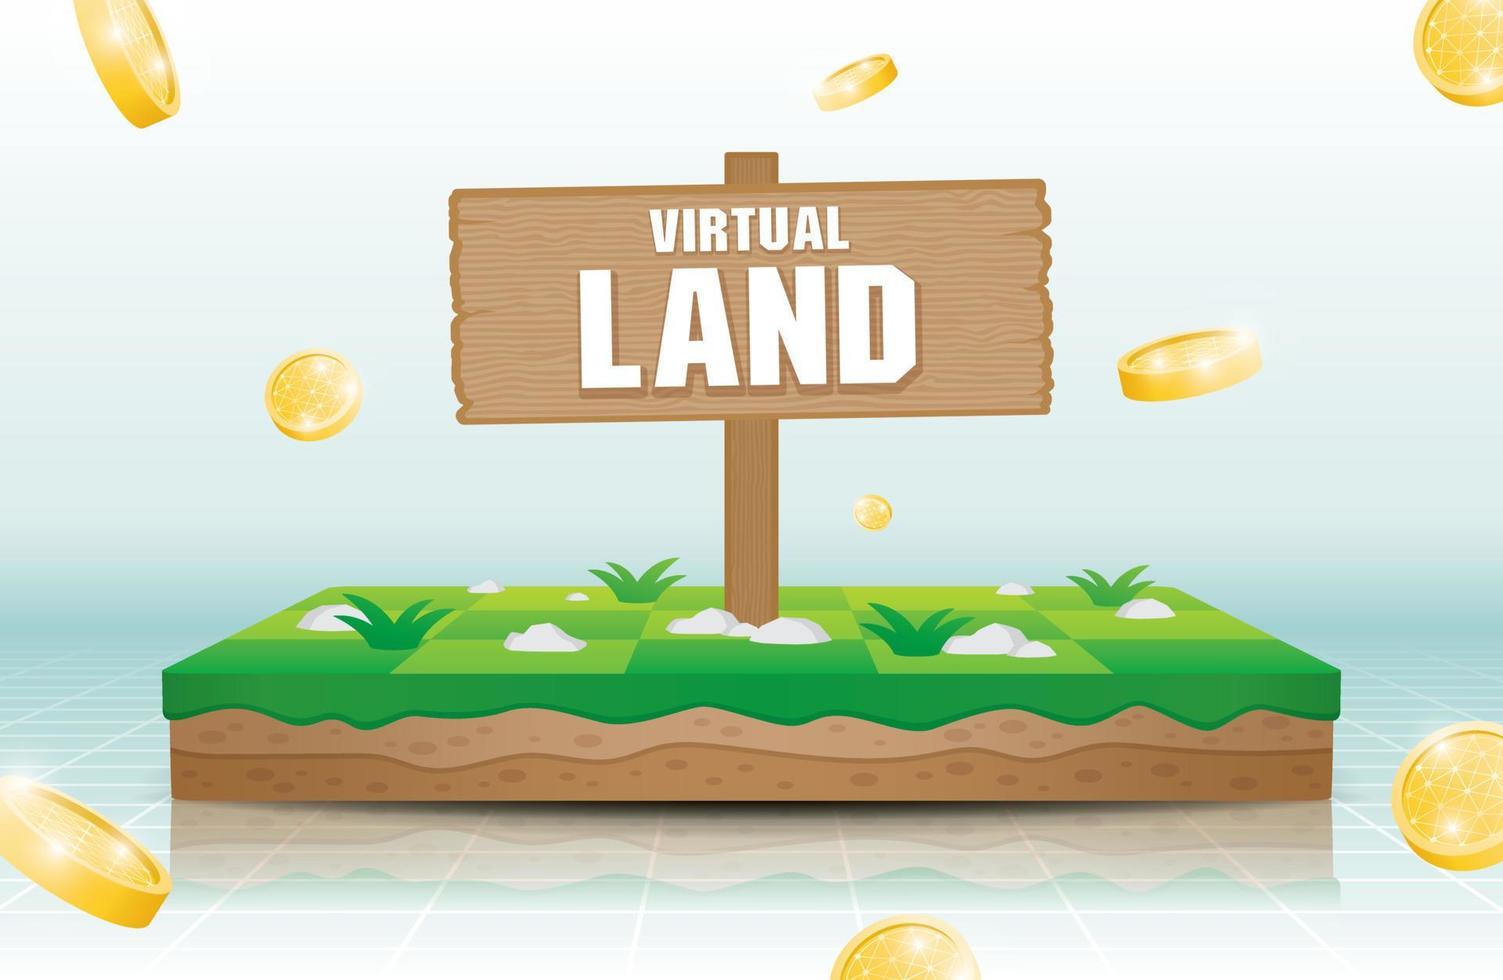 virtual land 3d illustration vector with coin graphic element